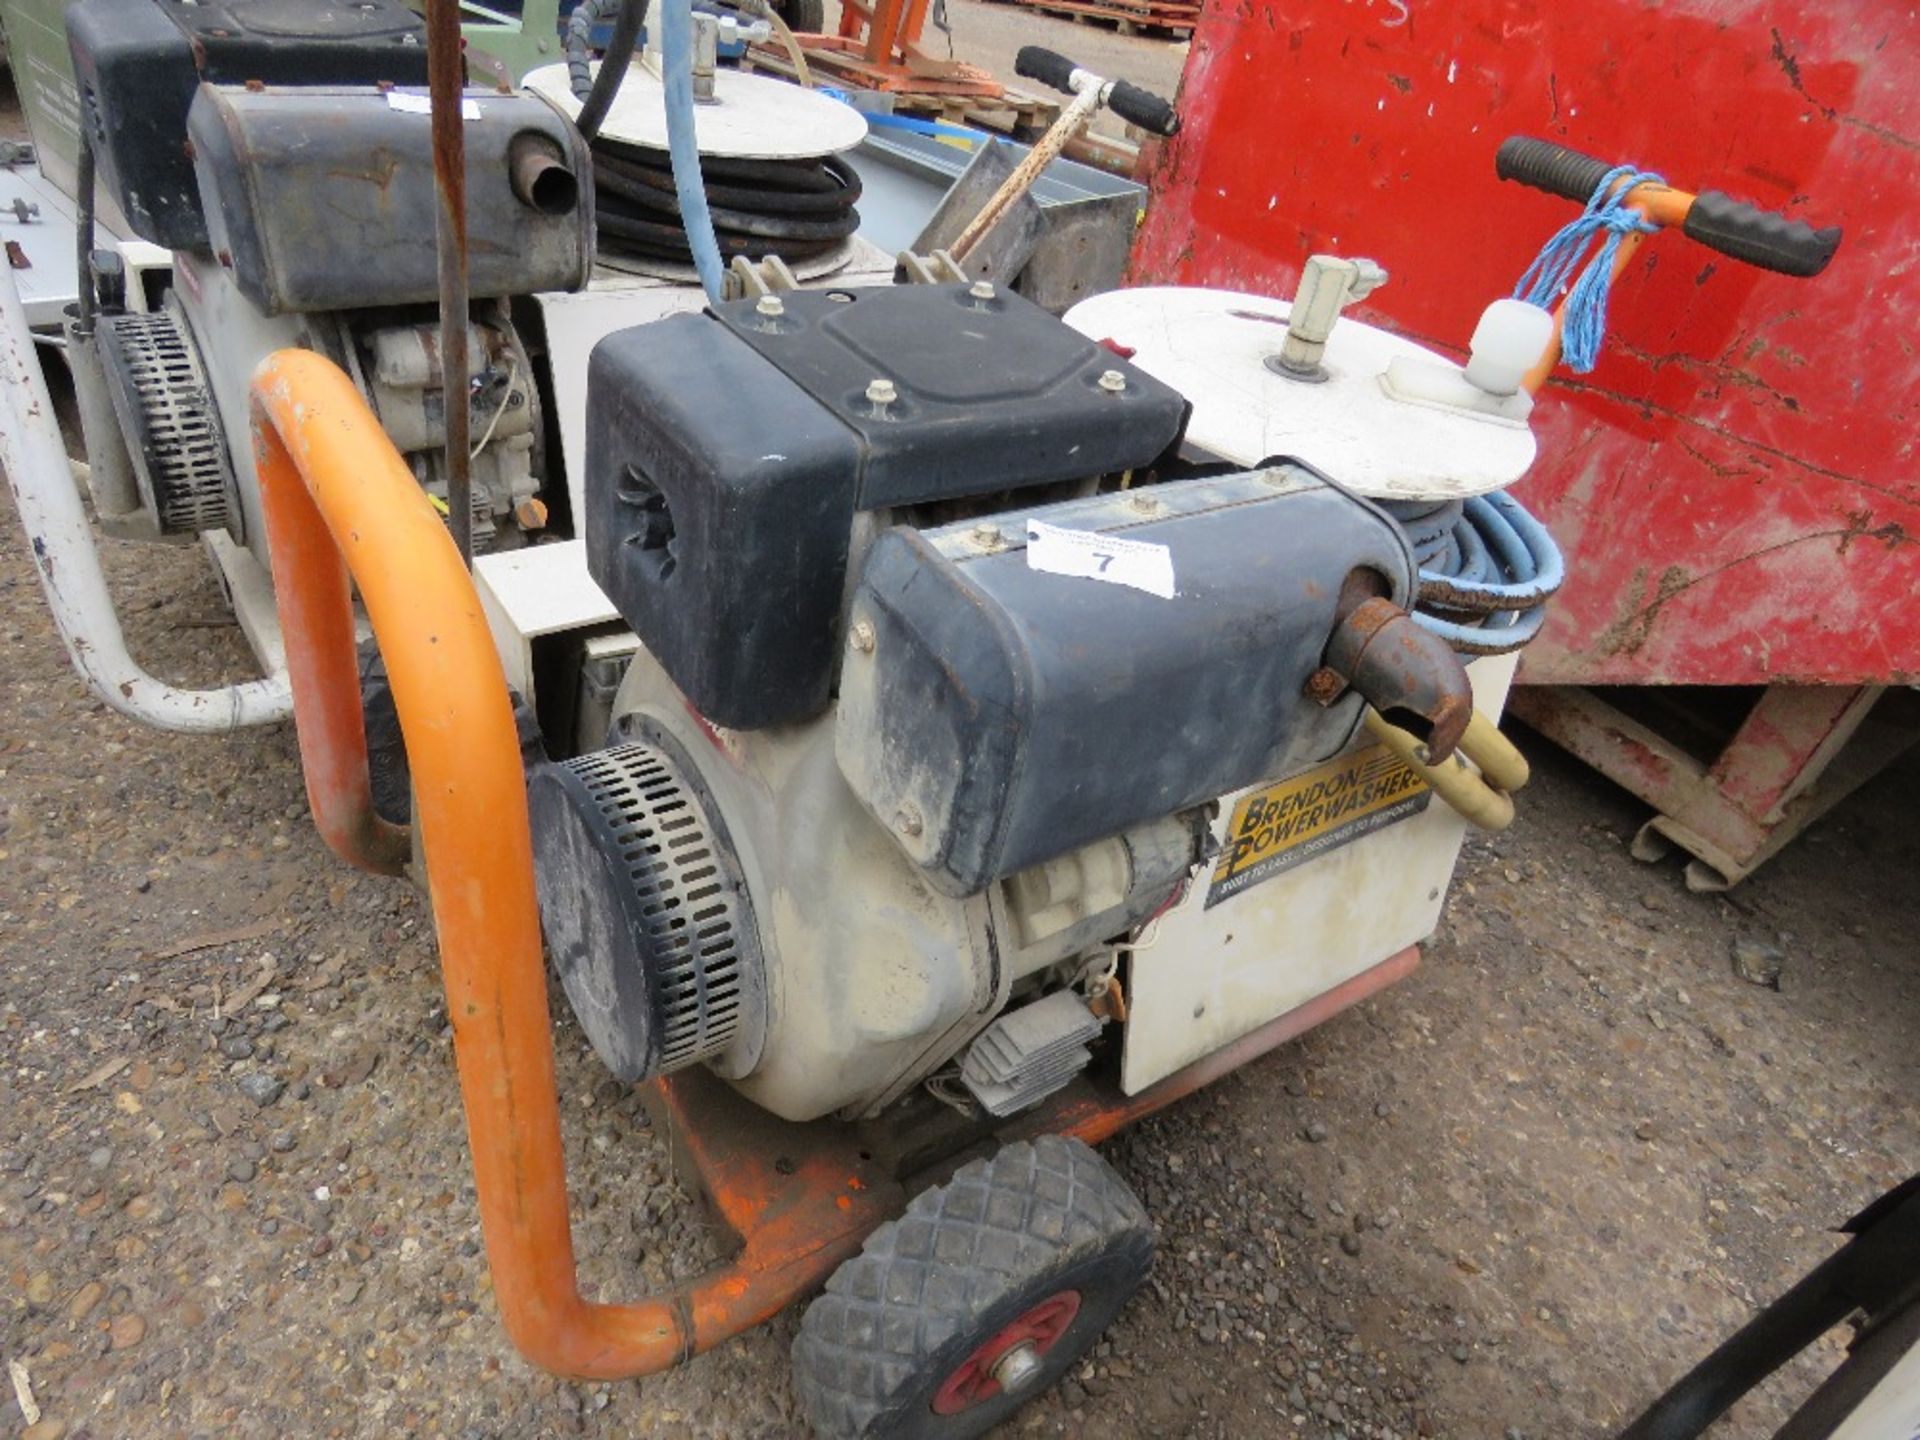 YANMAR ENGINED BRENDON POWER WASHER WITH HOSE AND LANCE.